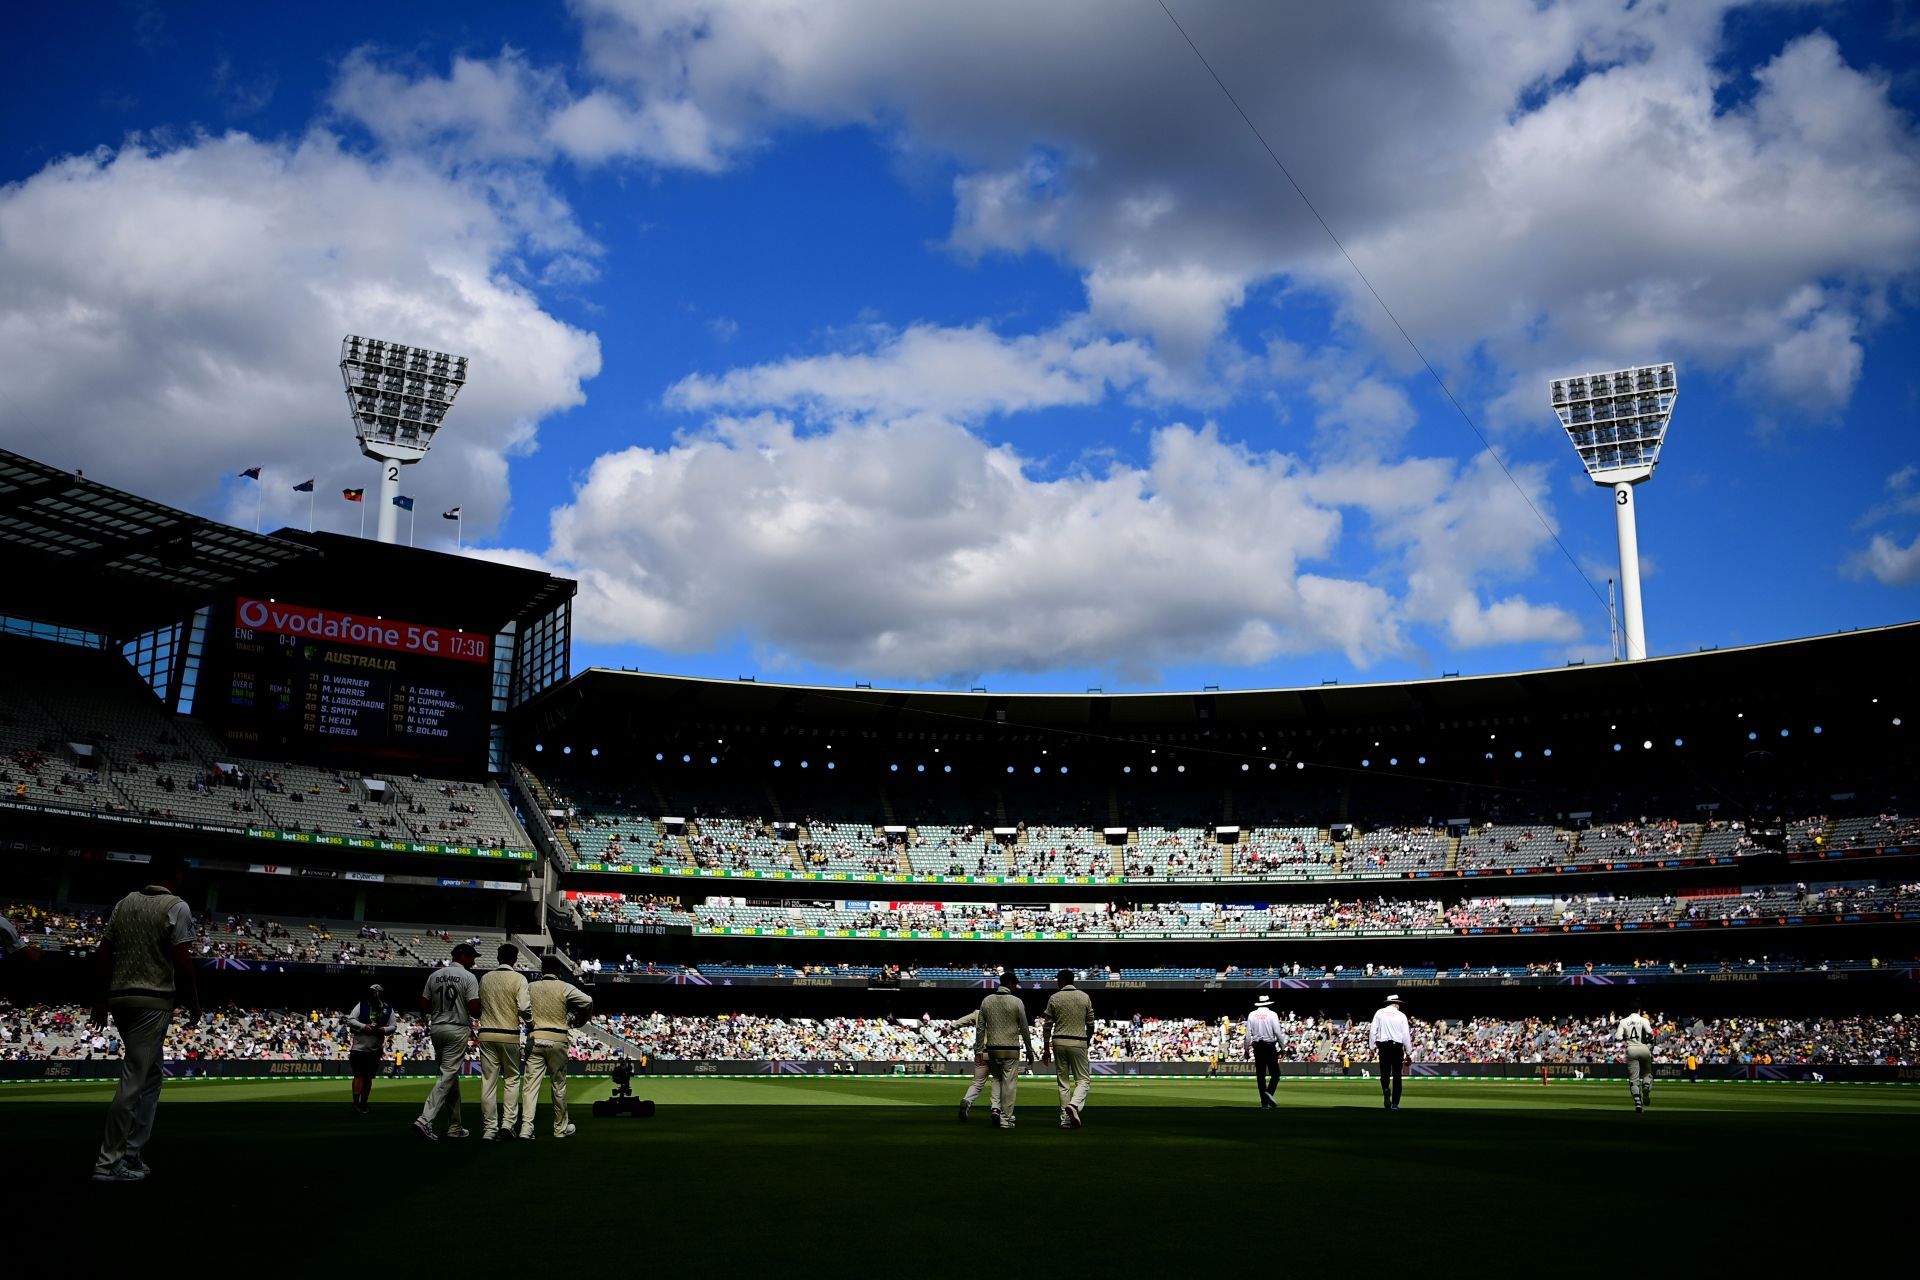 There have been calls to let MCG host the remaining Tests due to a COVID-19 outbreak.